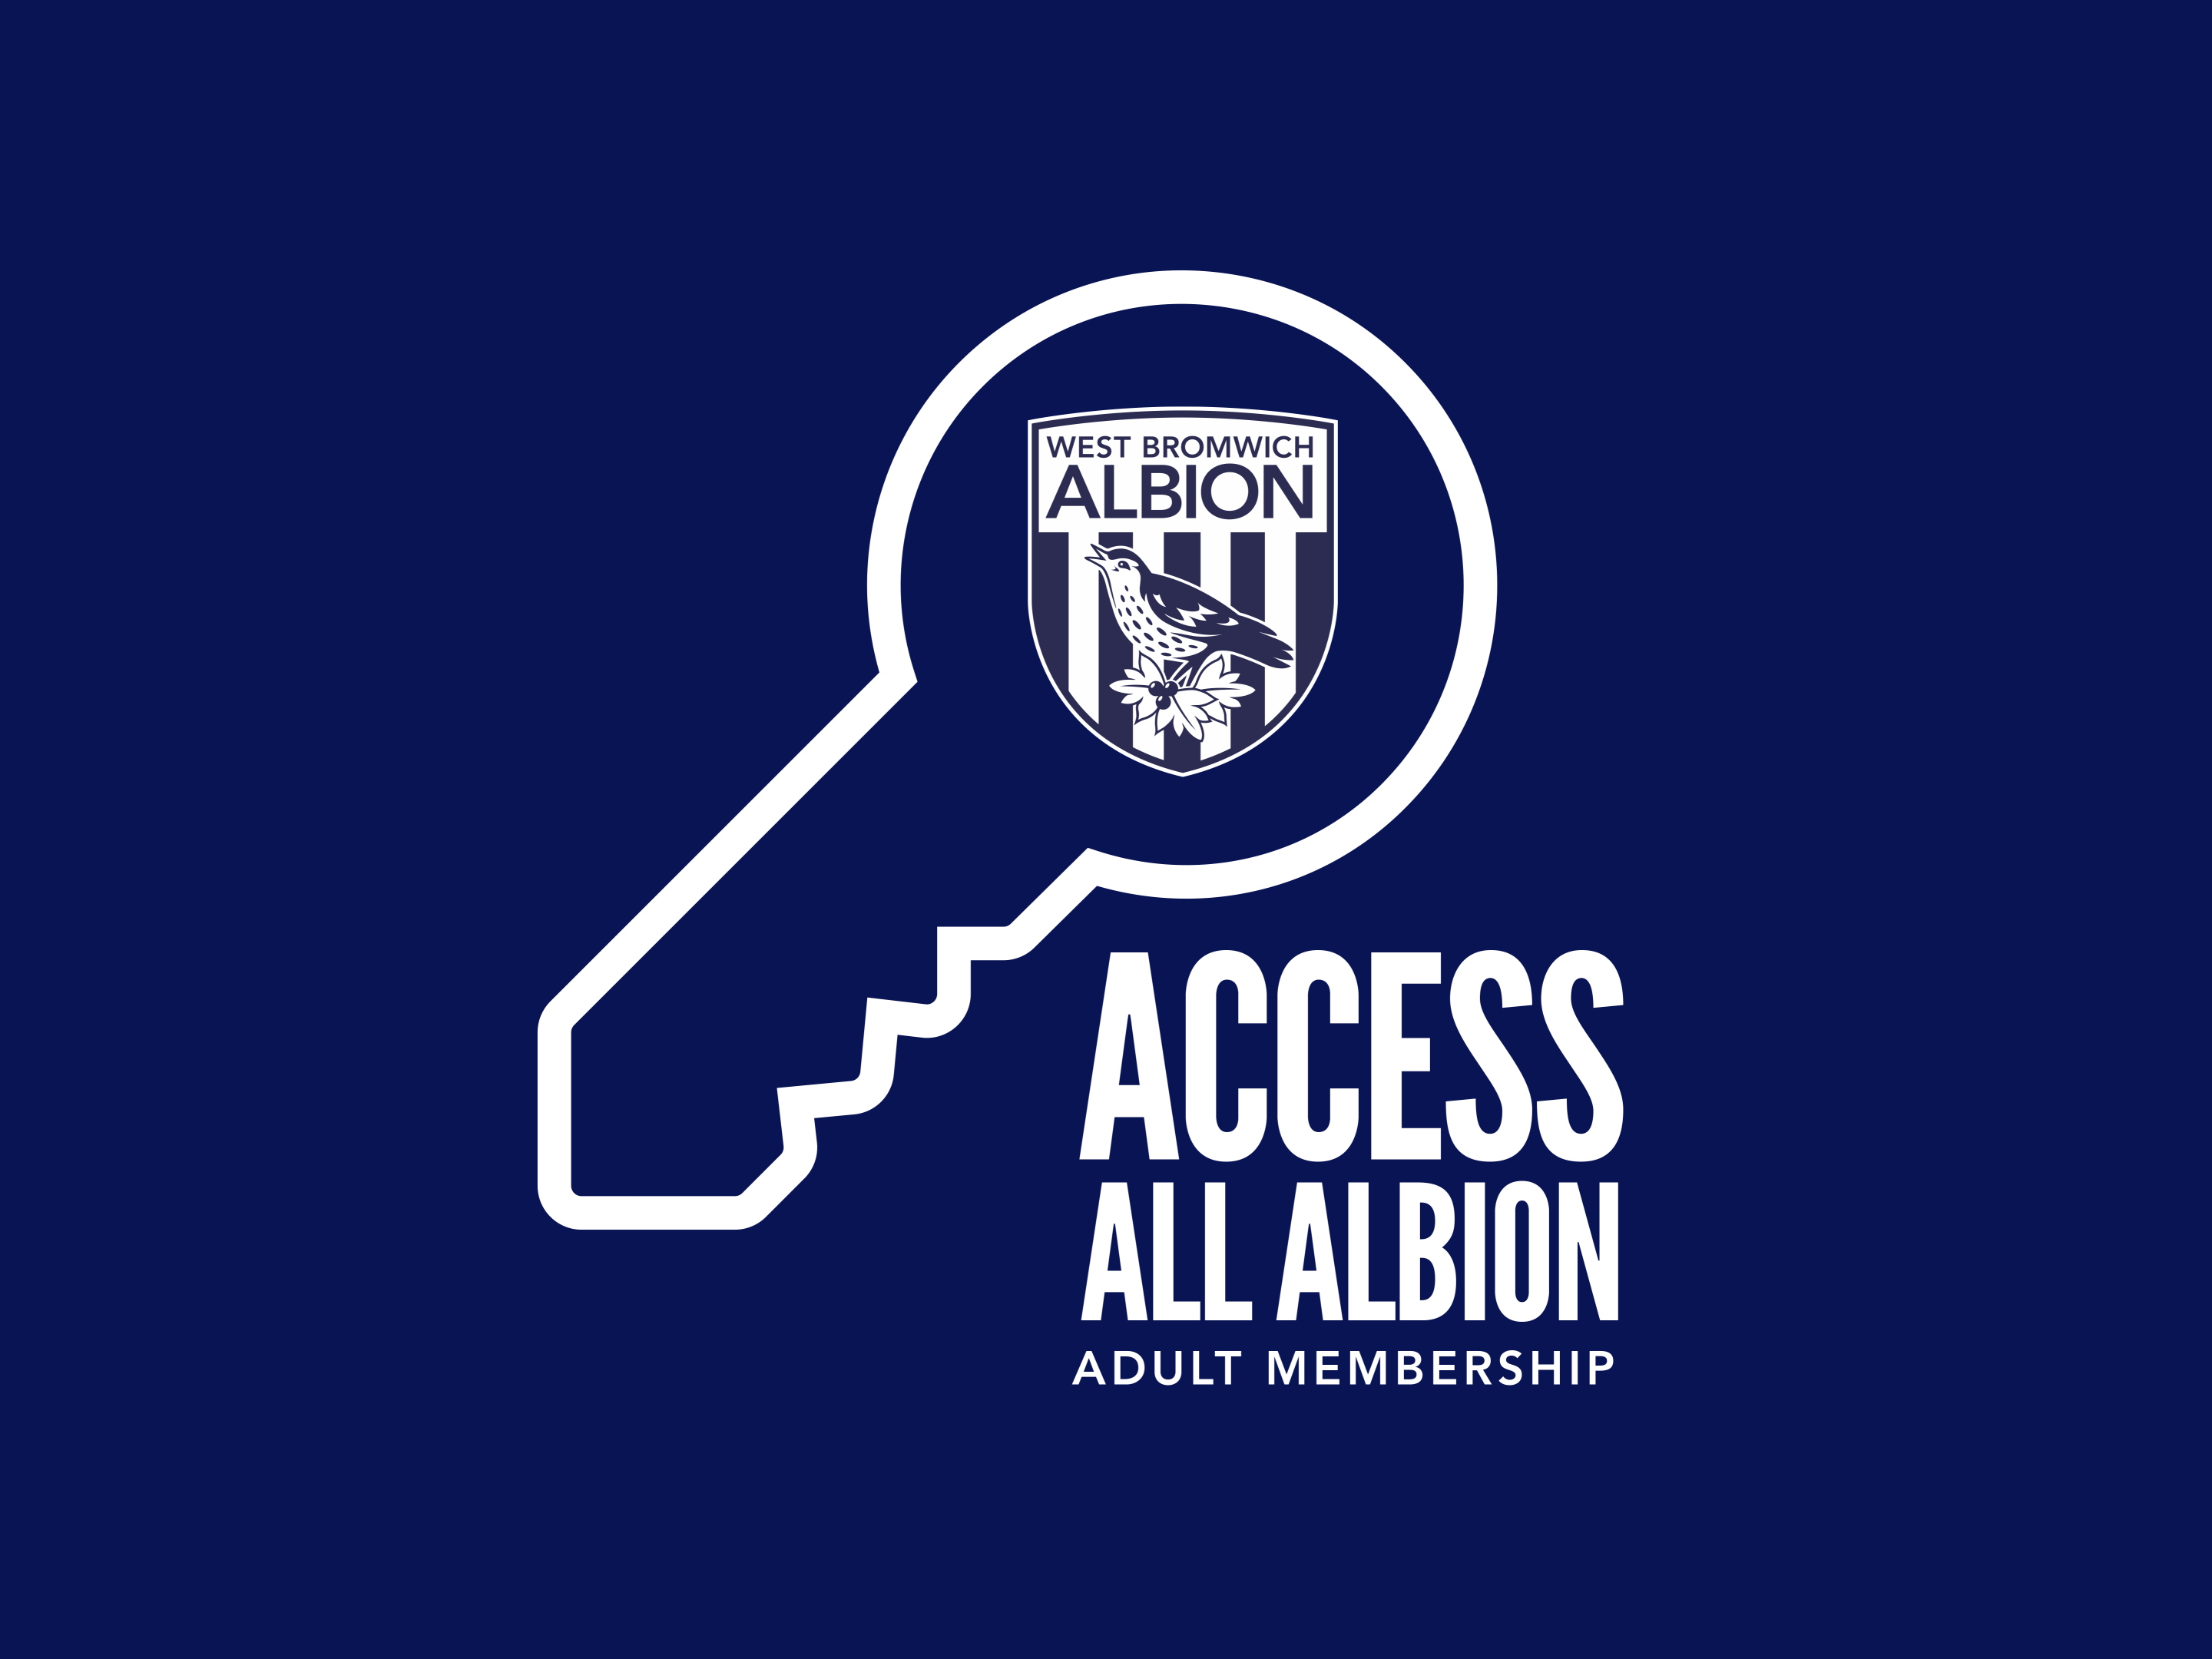 Access All Albion